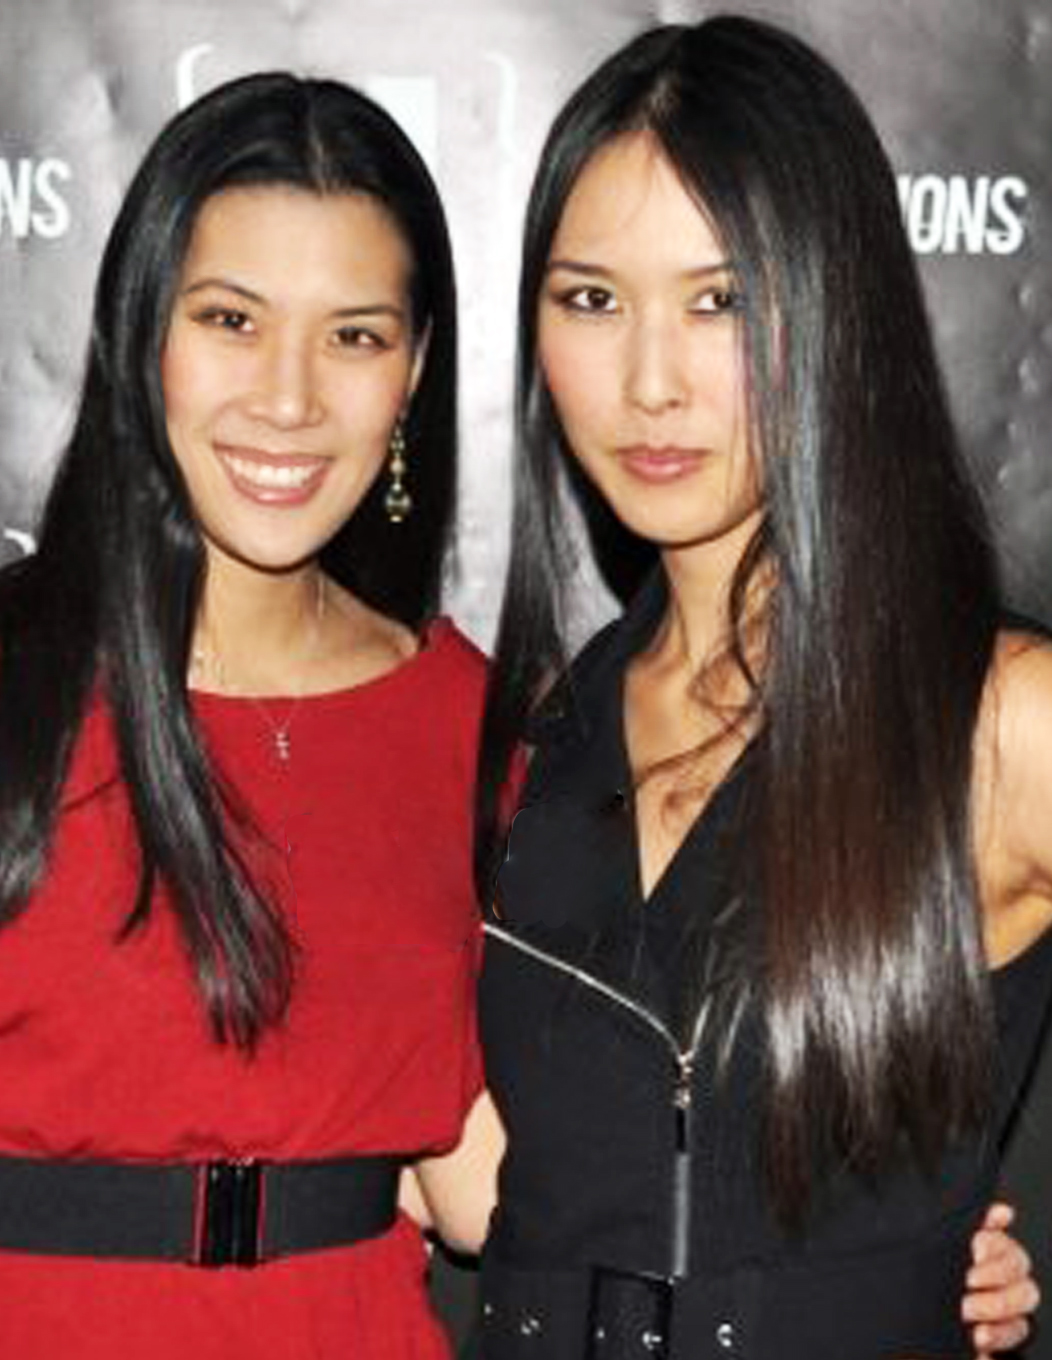 Malana Lea and writer Wynne Tsing arrive at Premier of 'Compulsions' in Los Angeles, California